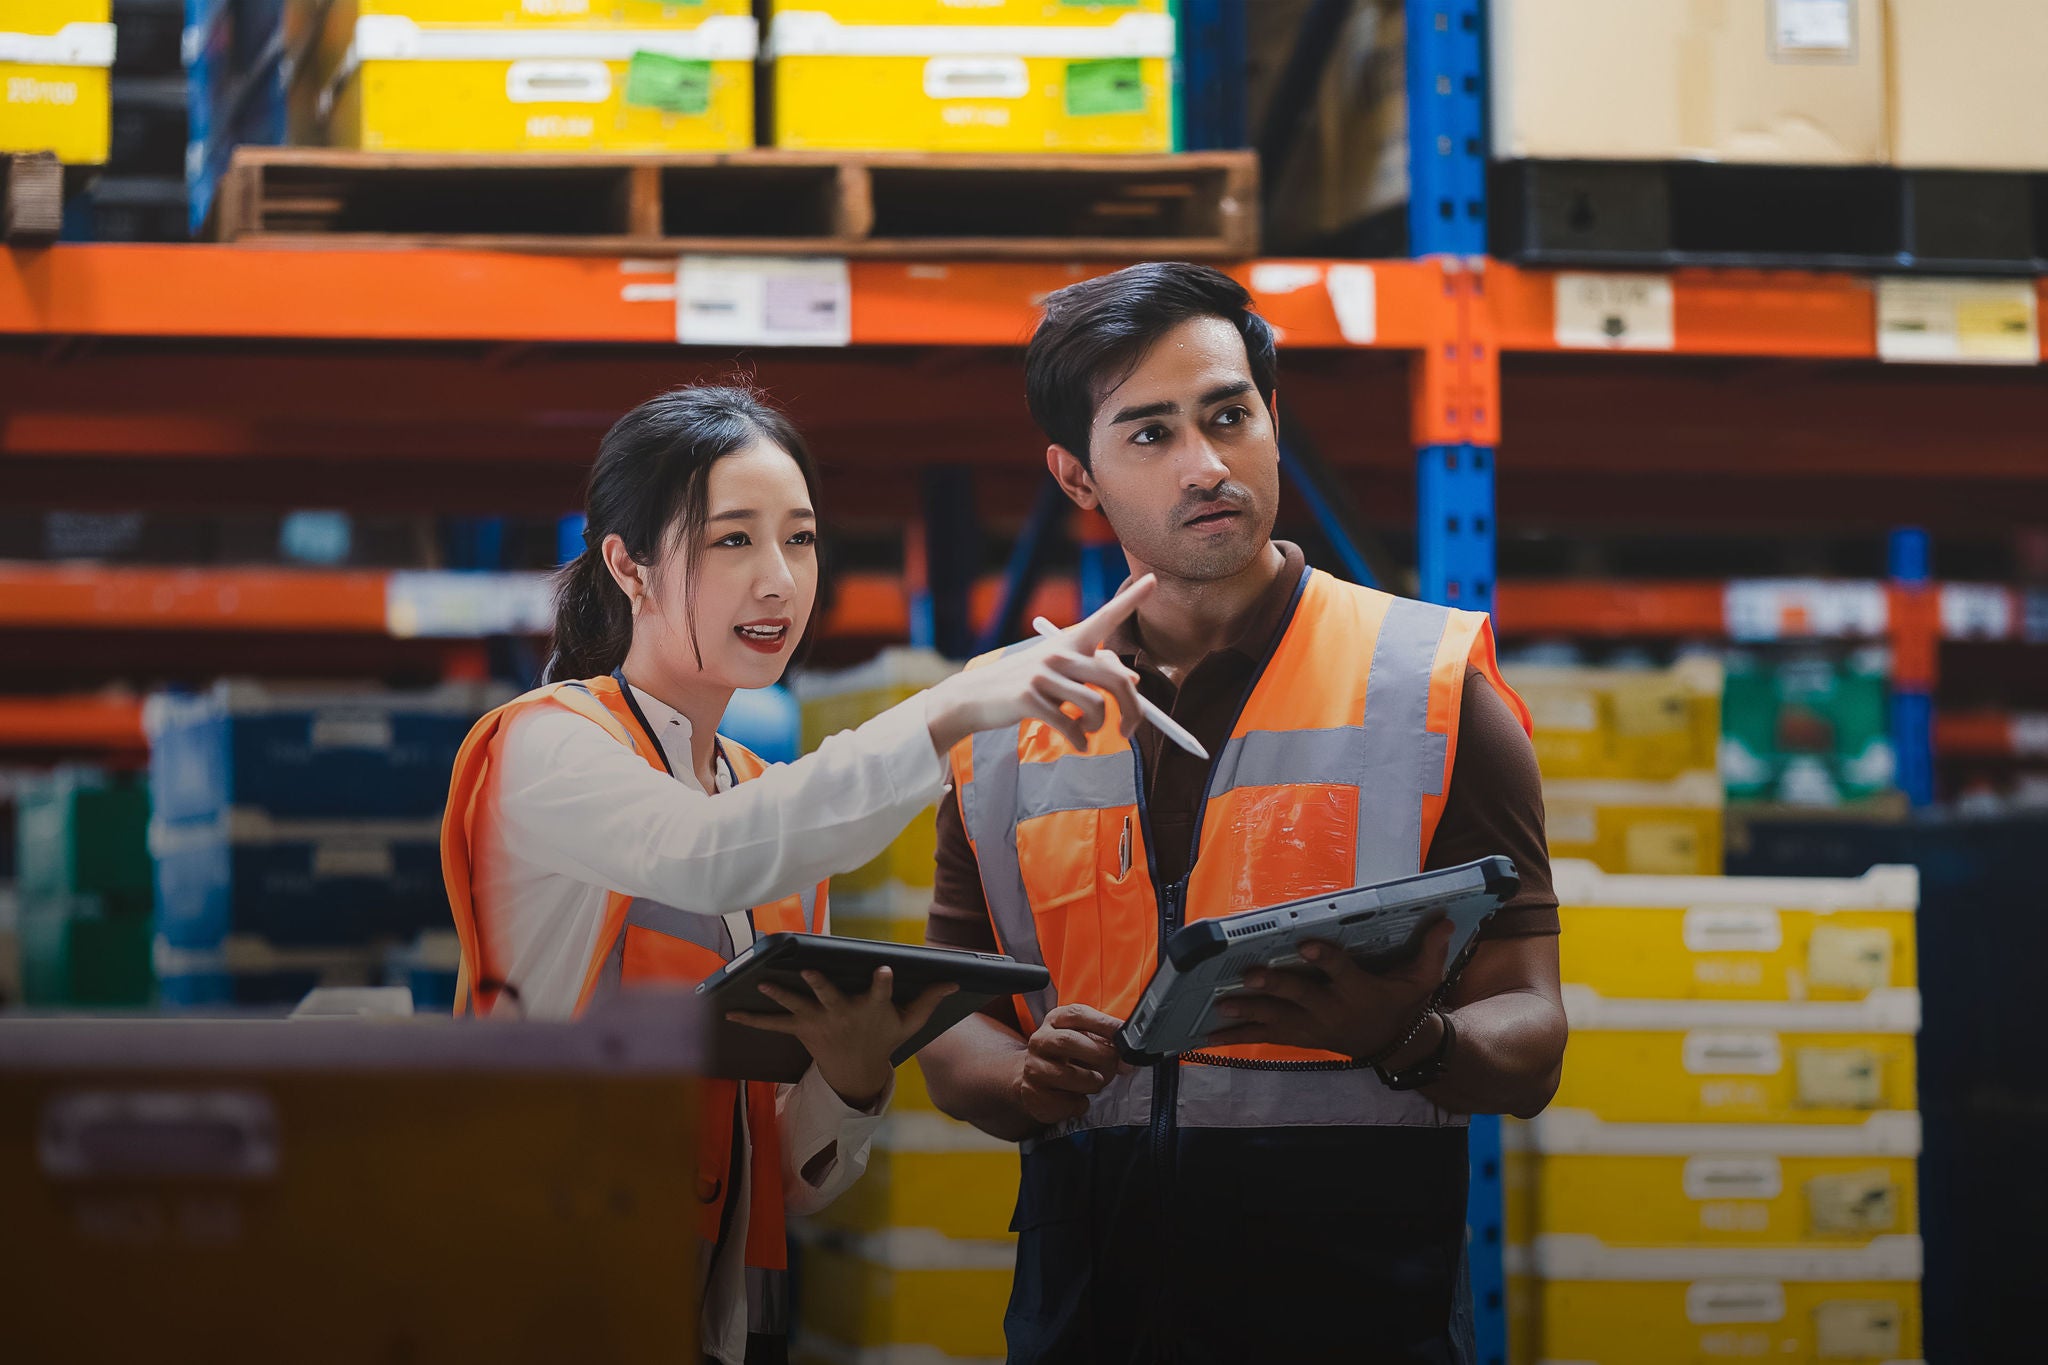 Warehouse worker and manager checks stock and inventory